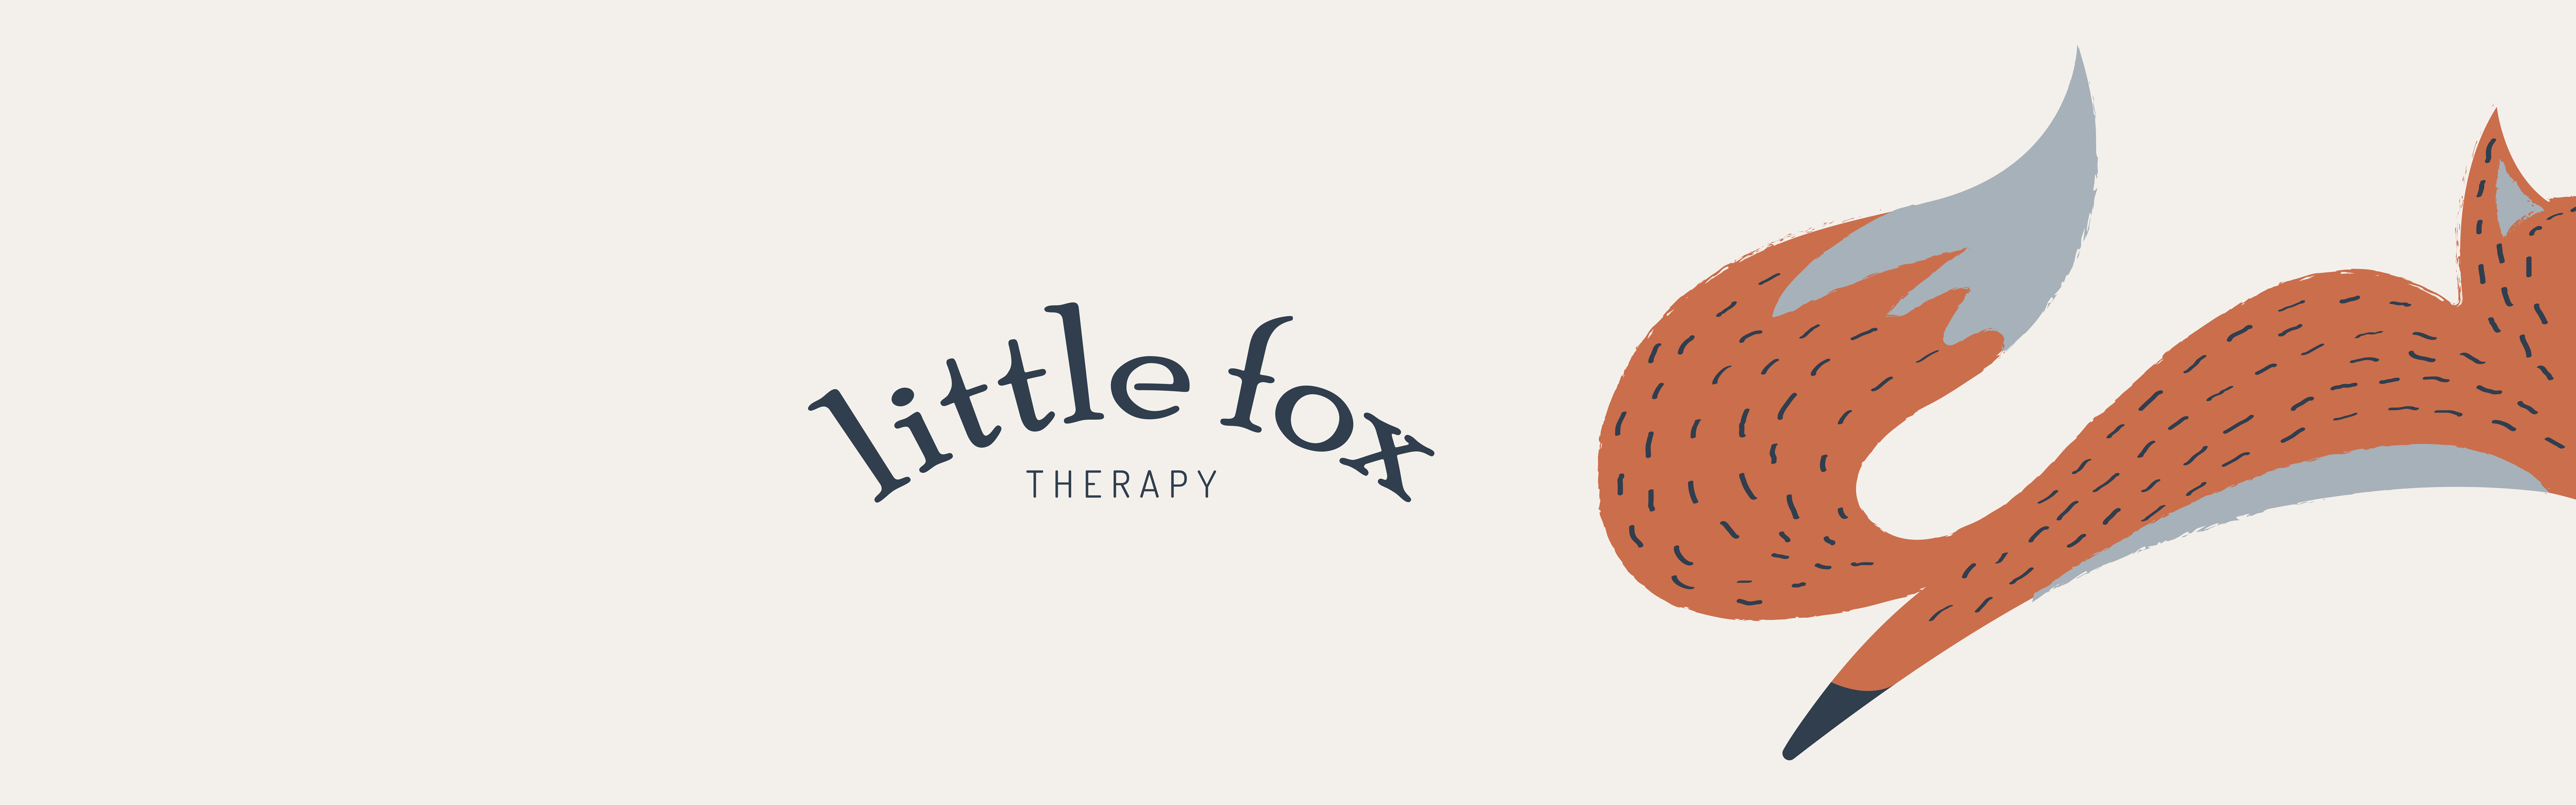 Graphic illustration of an abstract orange fox with the text "Little Fox Therapy" next to it.